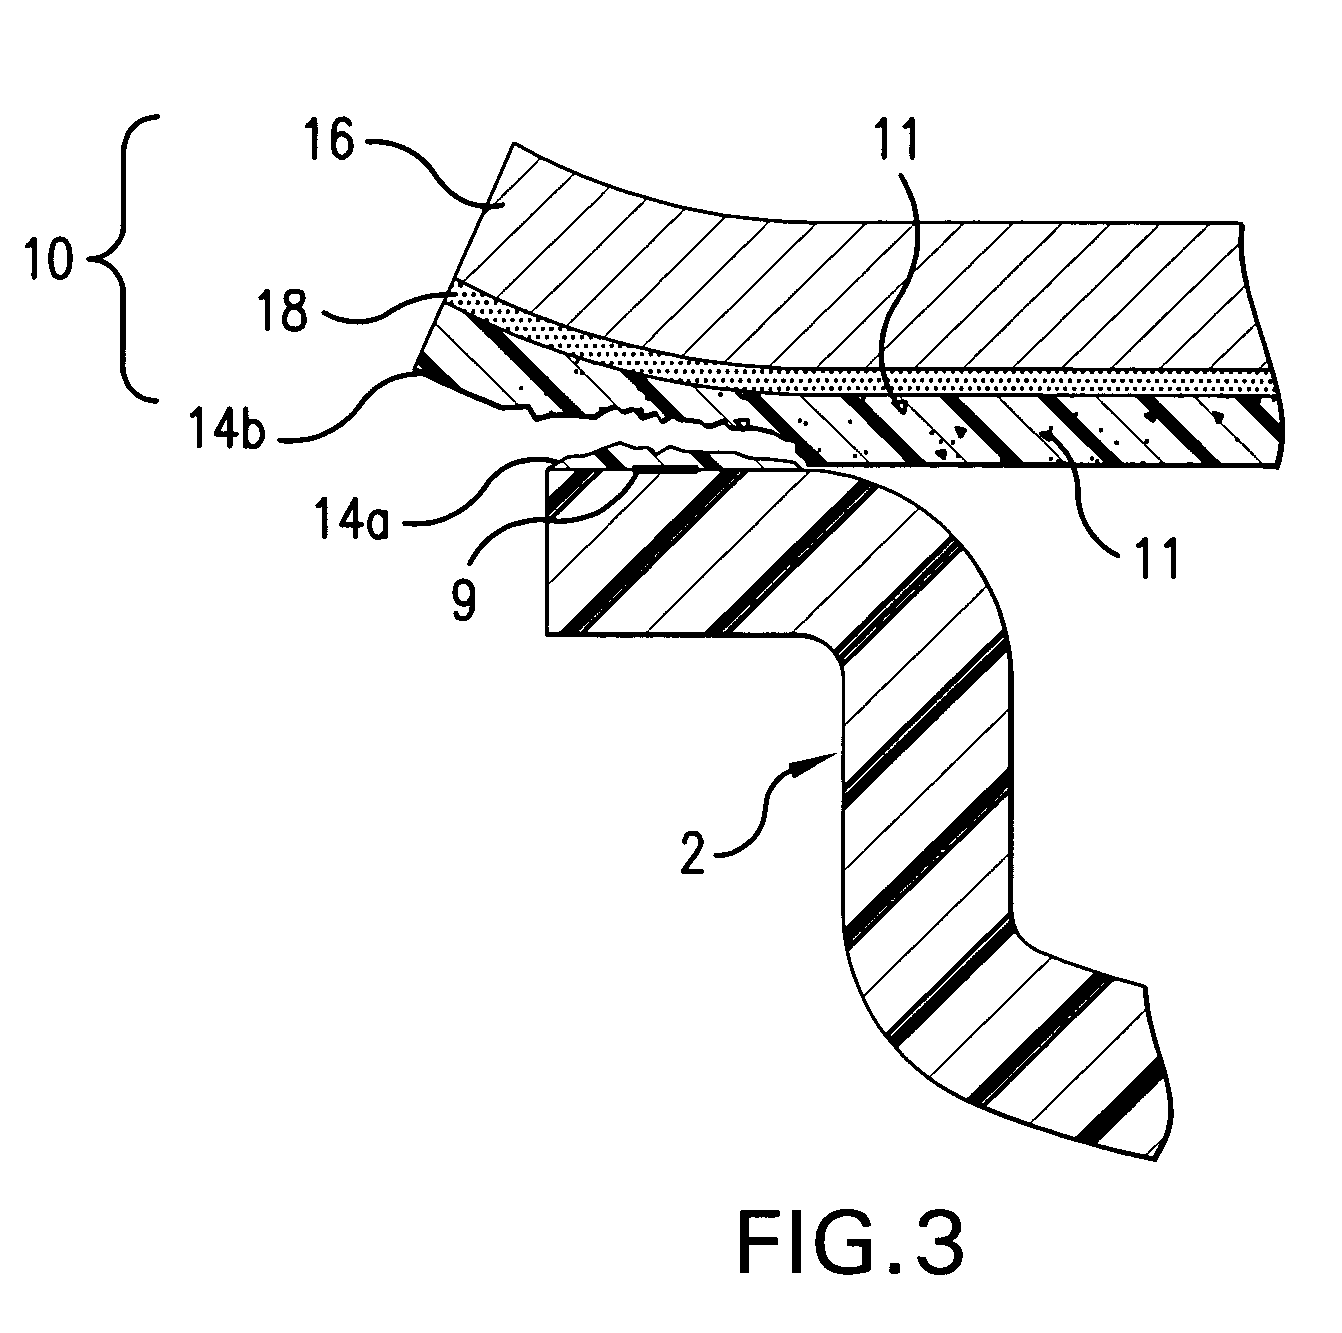 Peelable breakaway multi-layered structures and methods and compositions for making such structures